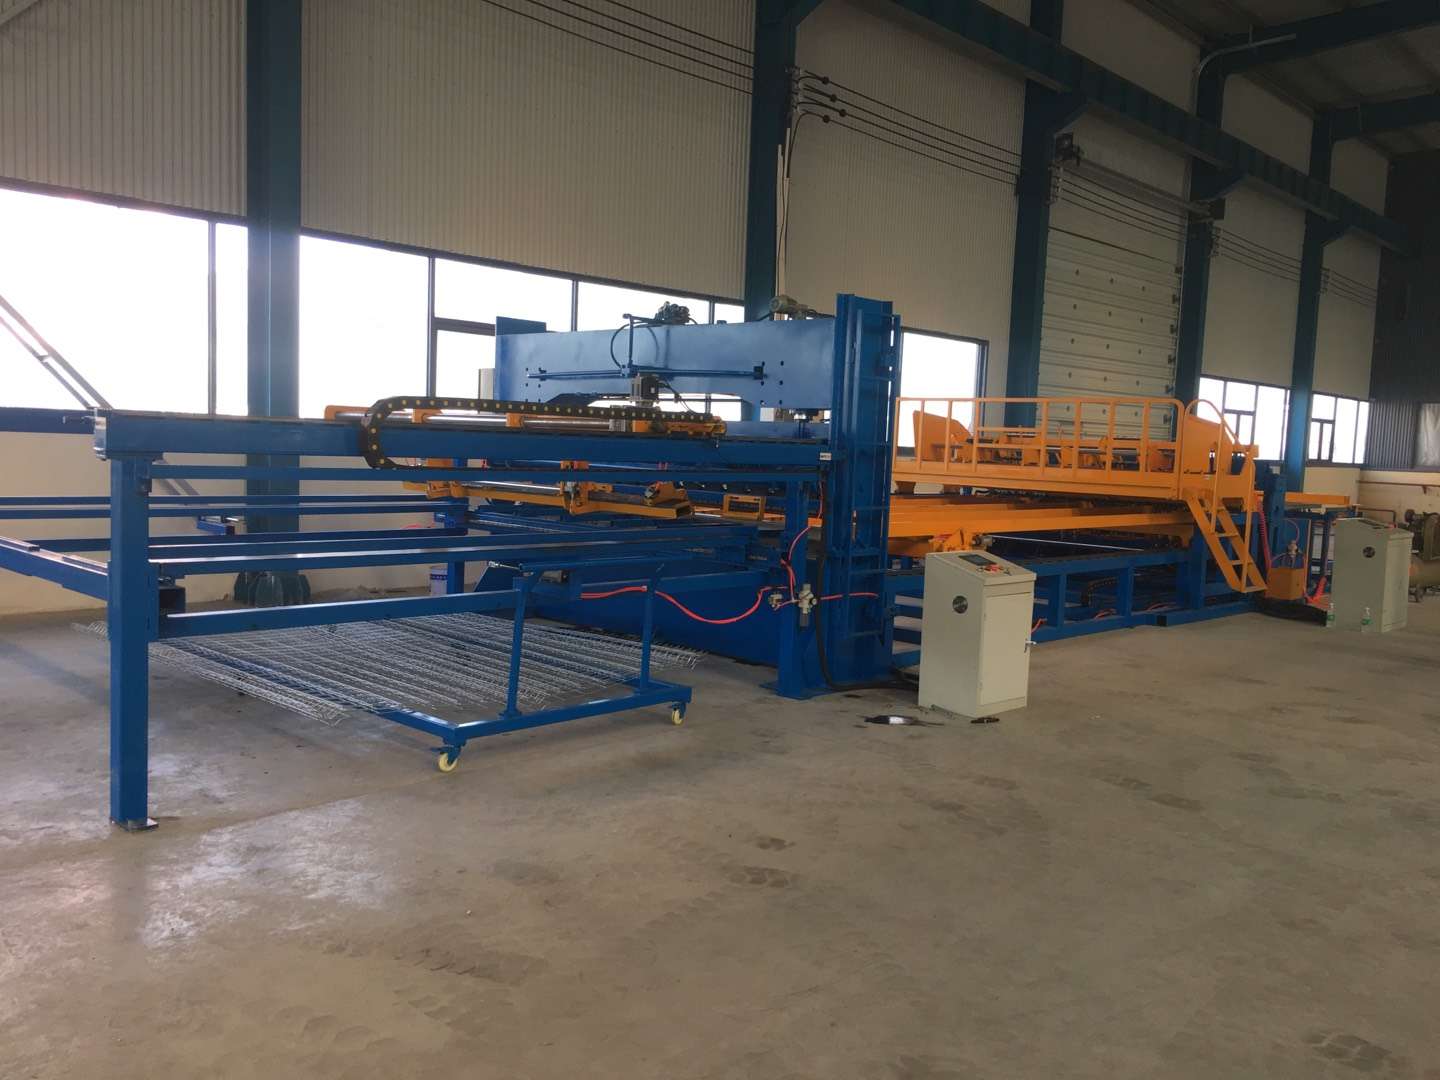 Fully automatic fence panel production line introduces the basics of fence panels